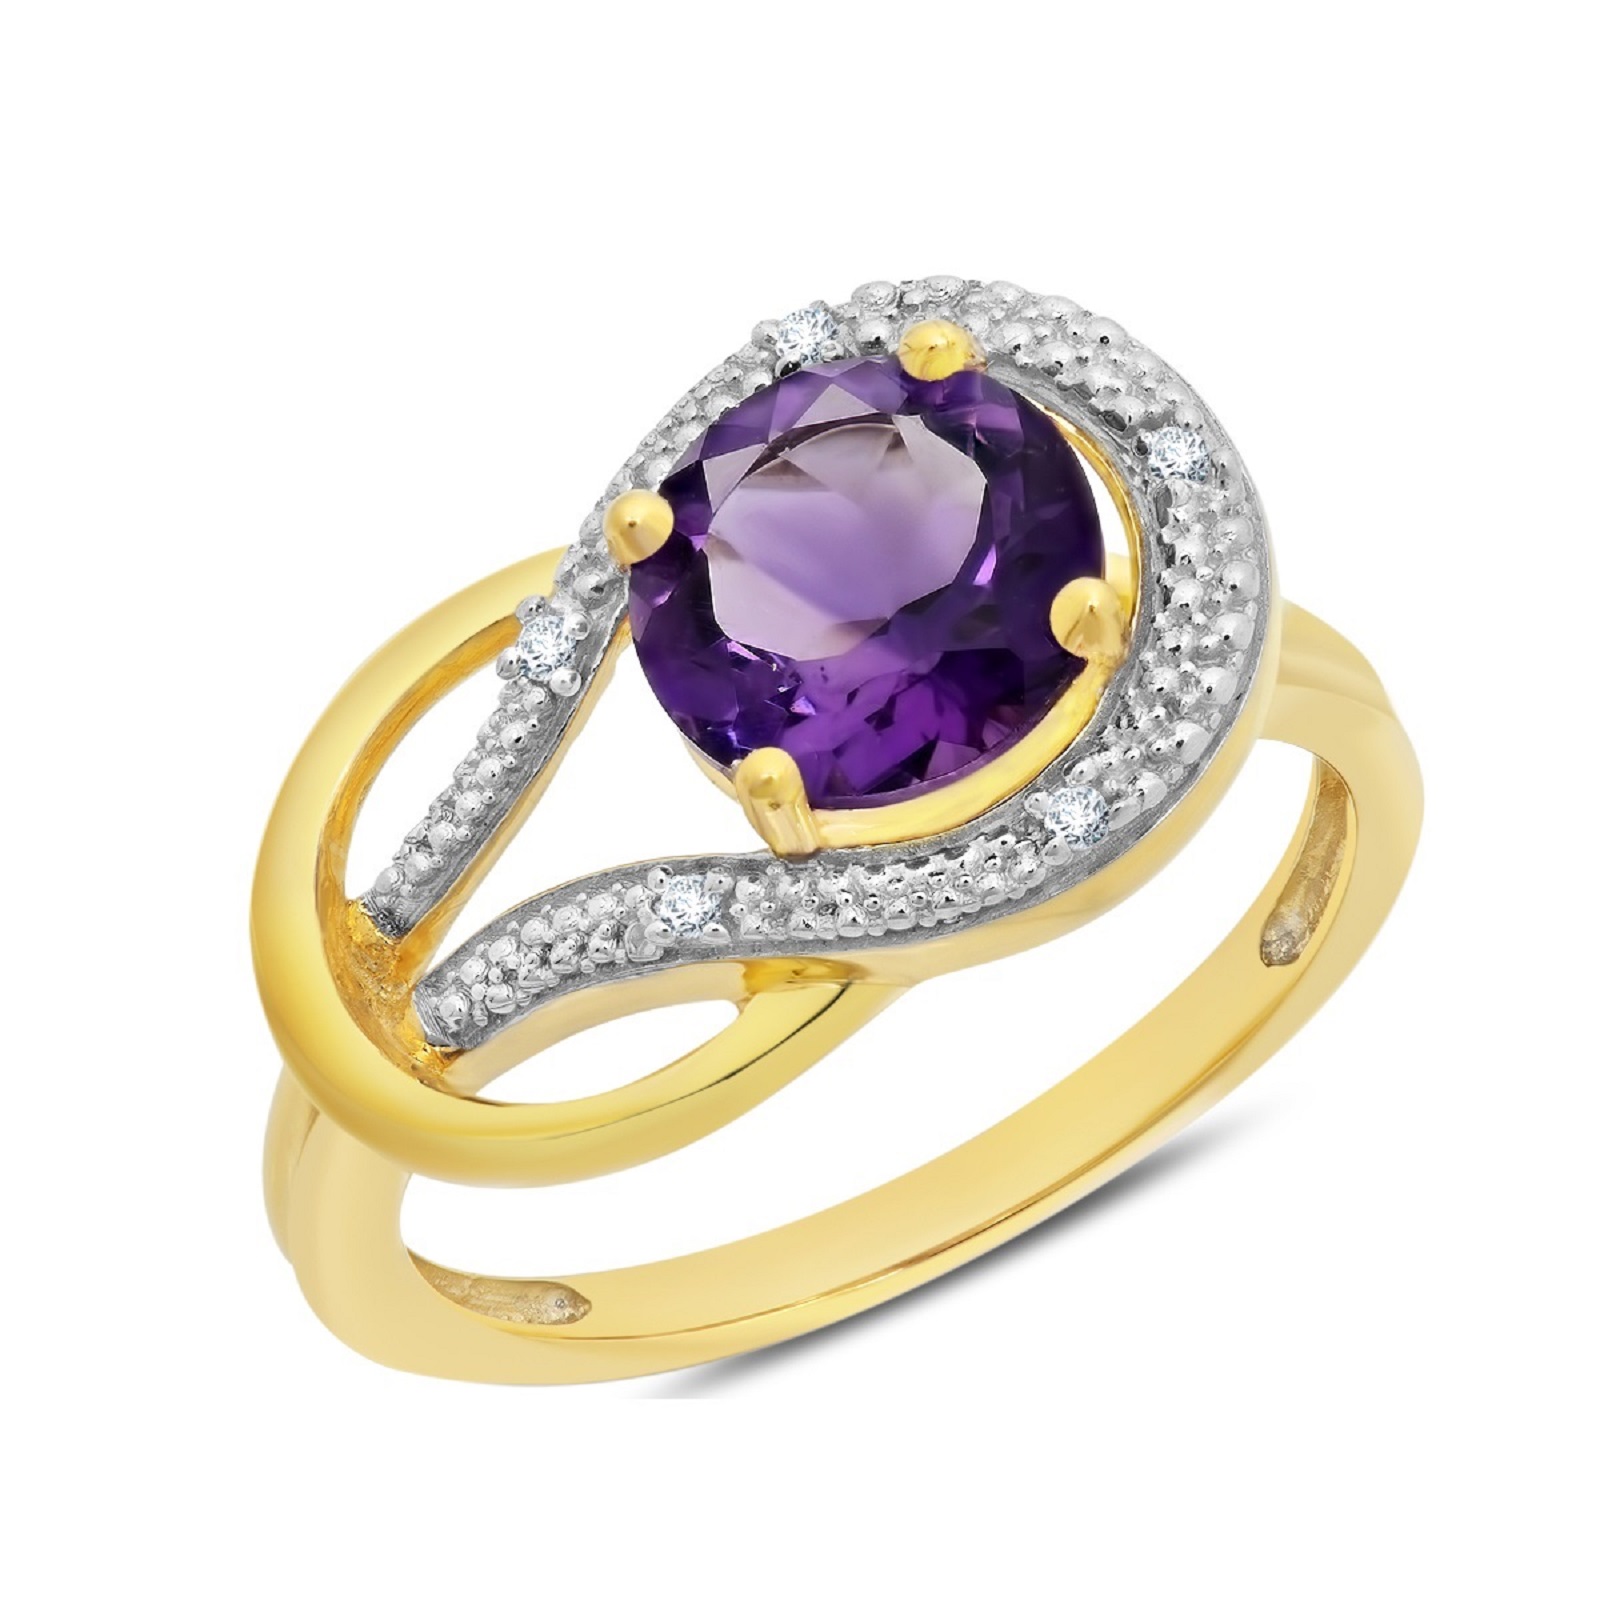 10KT Yellow Gold 8mm Round Amethyst and Diamond Accent Love Knot Ring (0.03 cttw, Size 6)